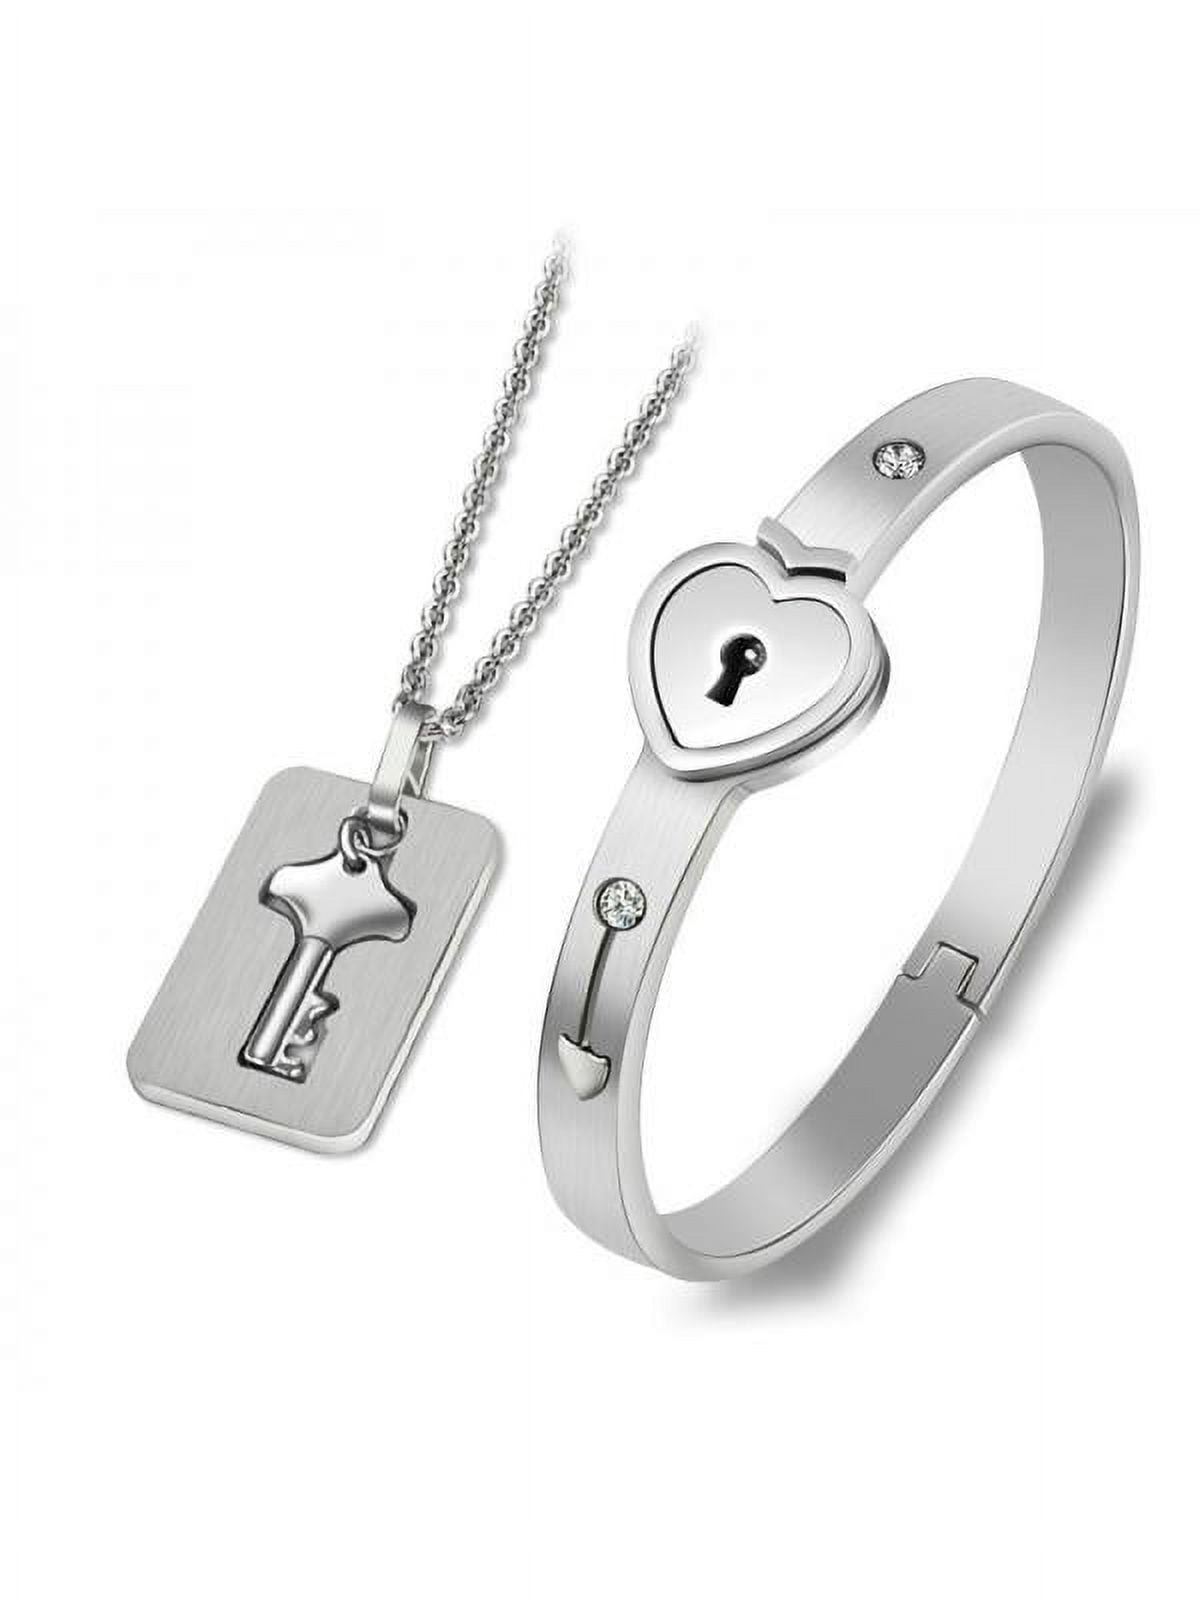 For Titanium Steel Matching Puzzle Couple Heart Lock Bracelet And For Key  Pendant | Fruugo BH